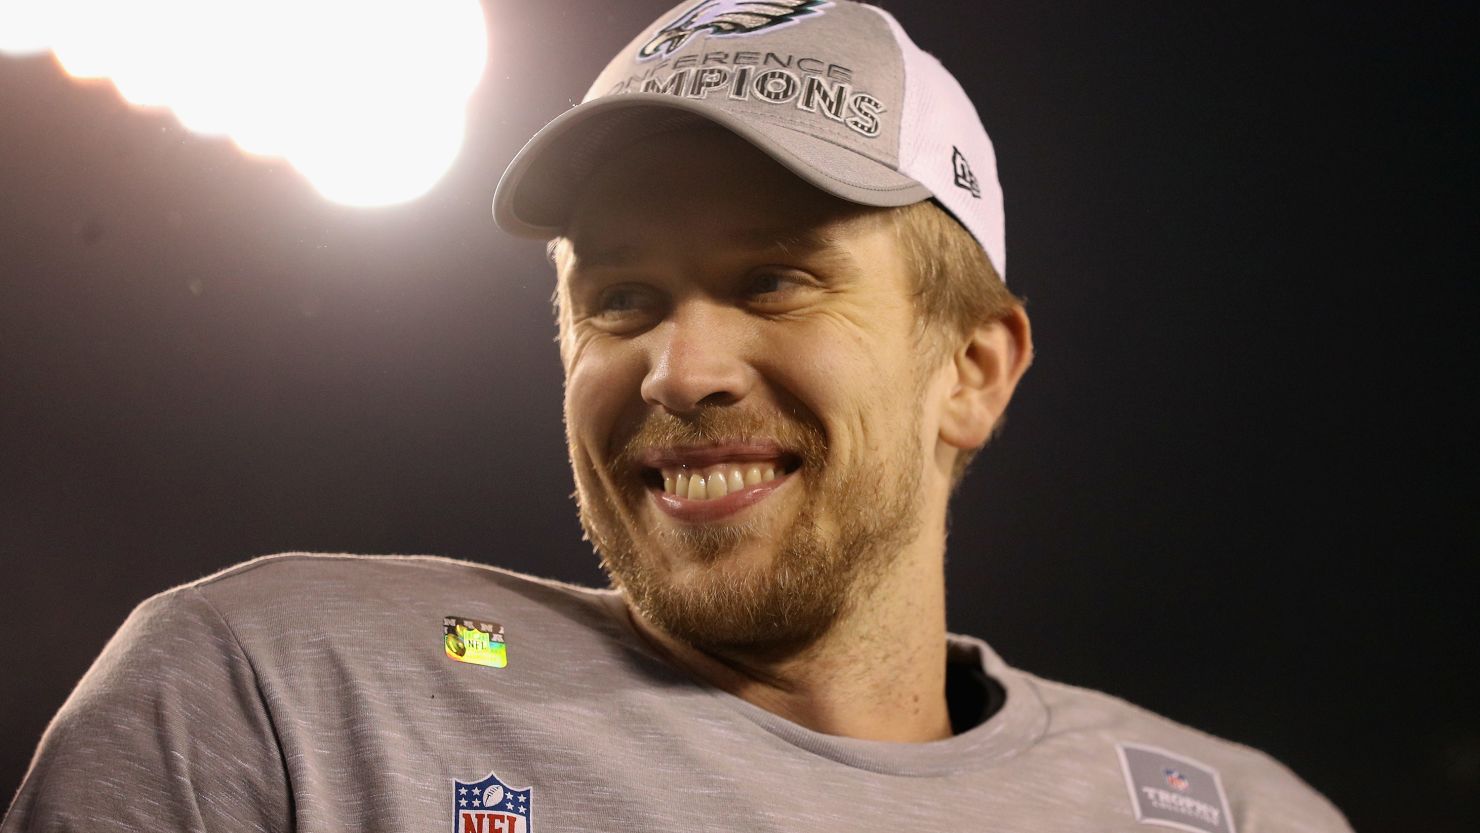 Nick Foles celebrated after the Eagles defeated the Vikings 38-7 in the NFC championship game on January 21 at Lincoln Financial Field.